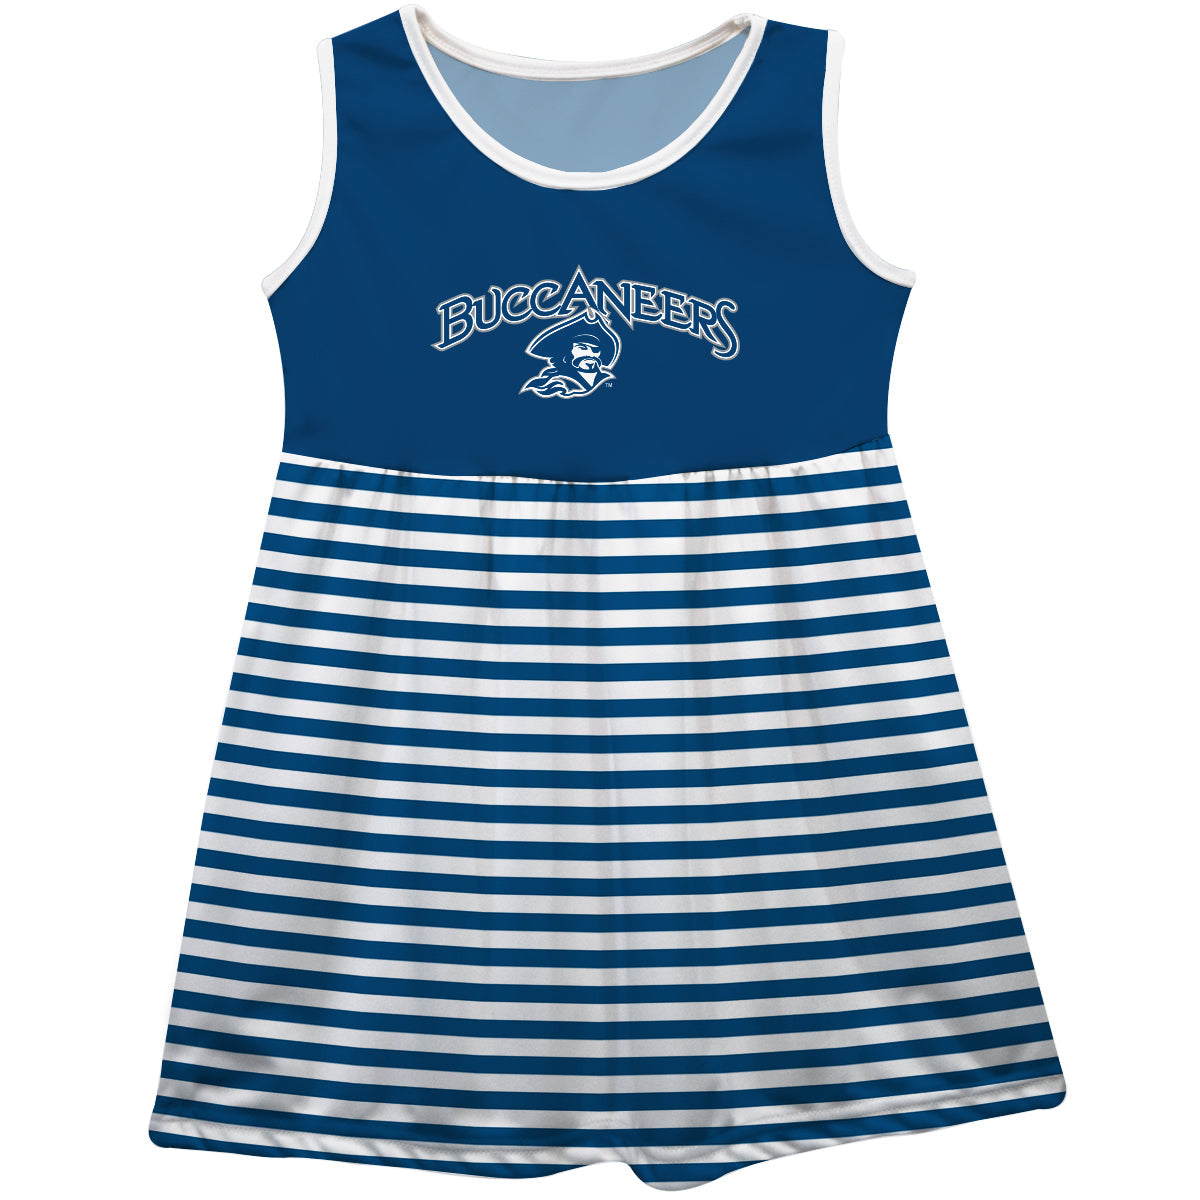 Blinn College Buccaneers Blue and White Sleeveless Tank Dress with Stripes on Skirt by Vive La Fete-Campus-Wardrobe